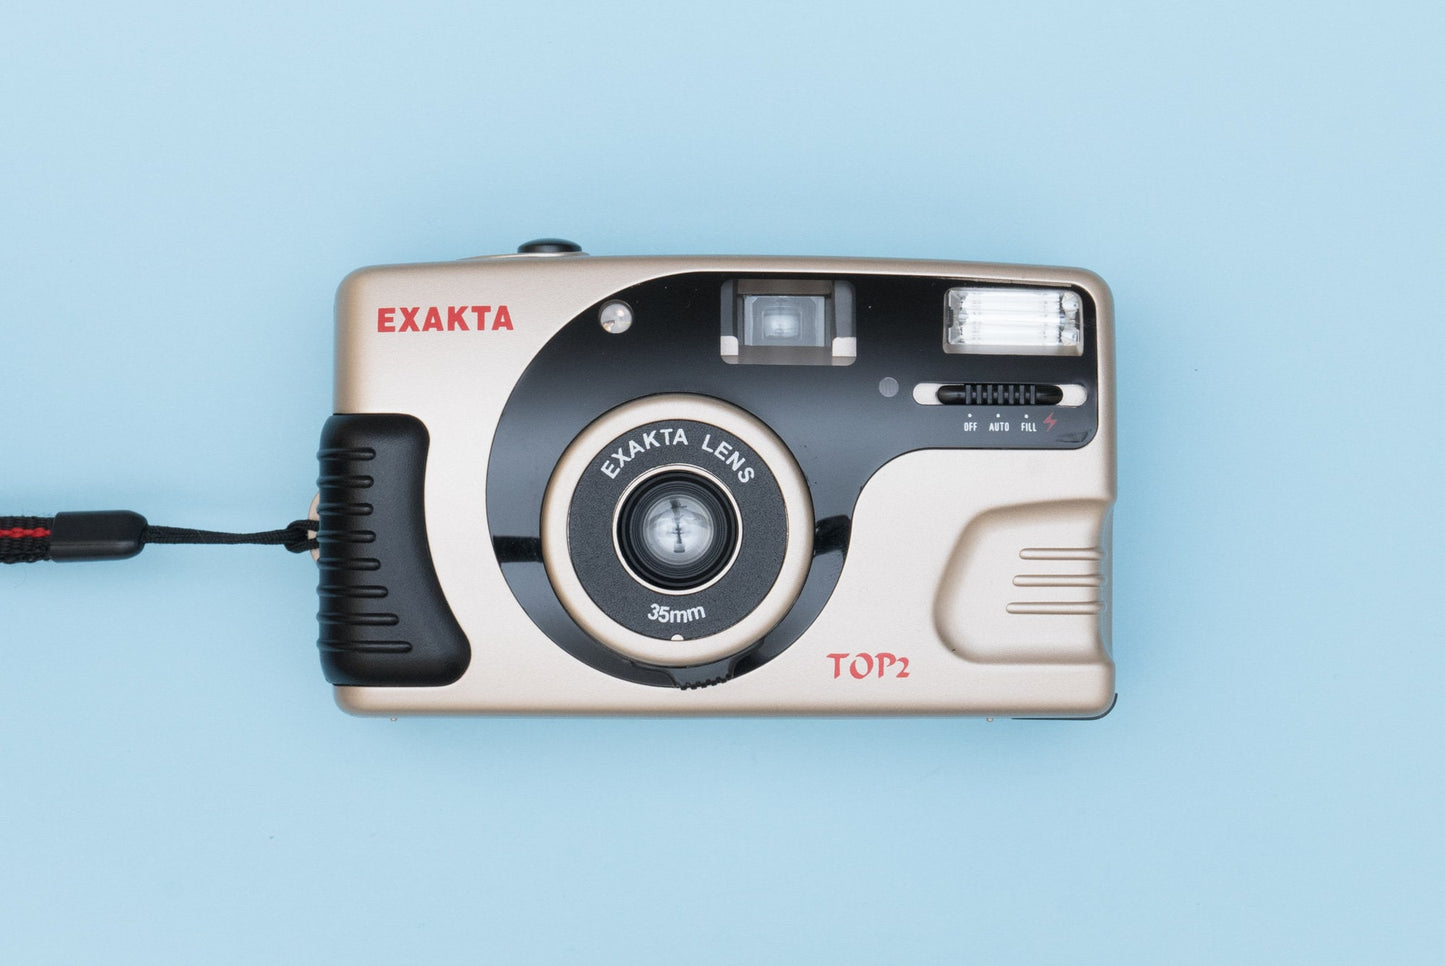 Exakta Top 2 Compact Point and Shoot 35mm Film Camera